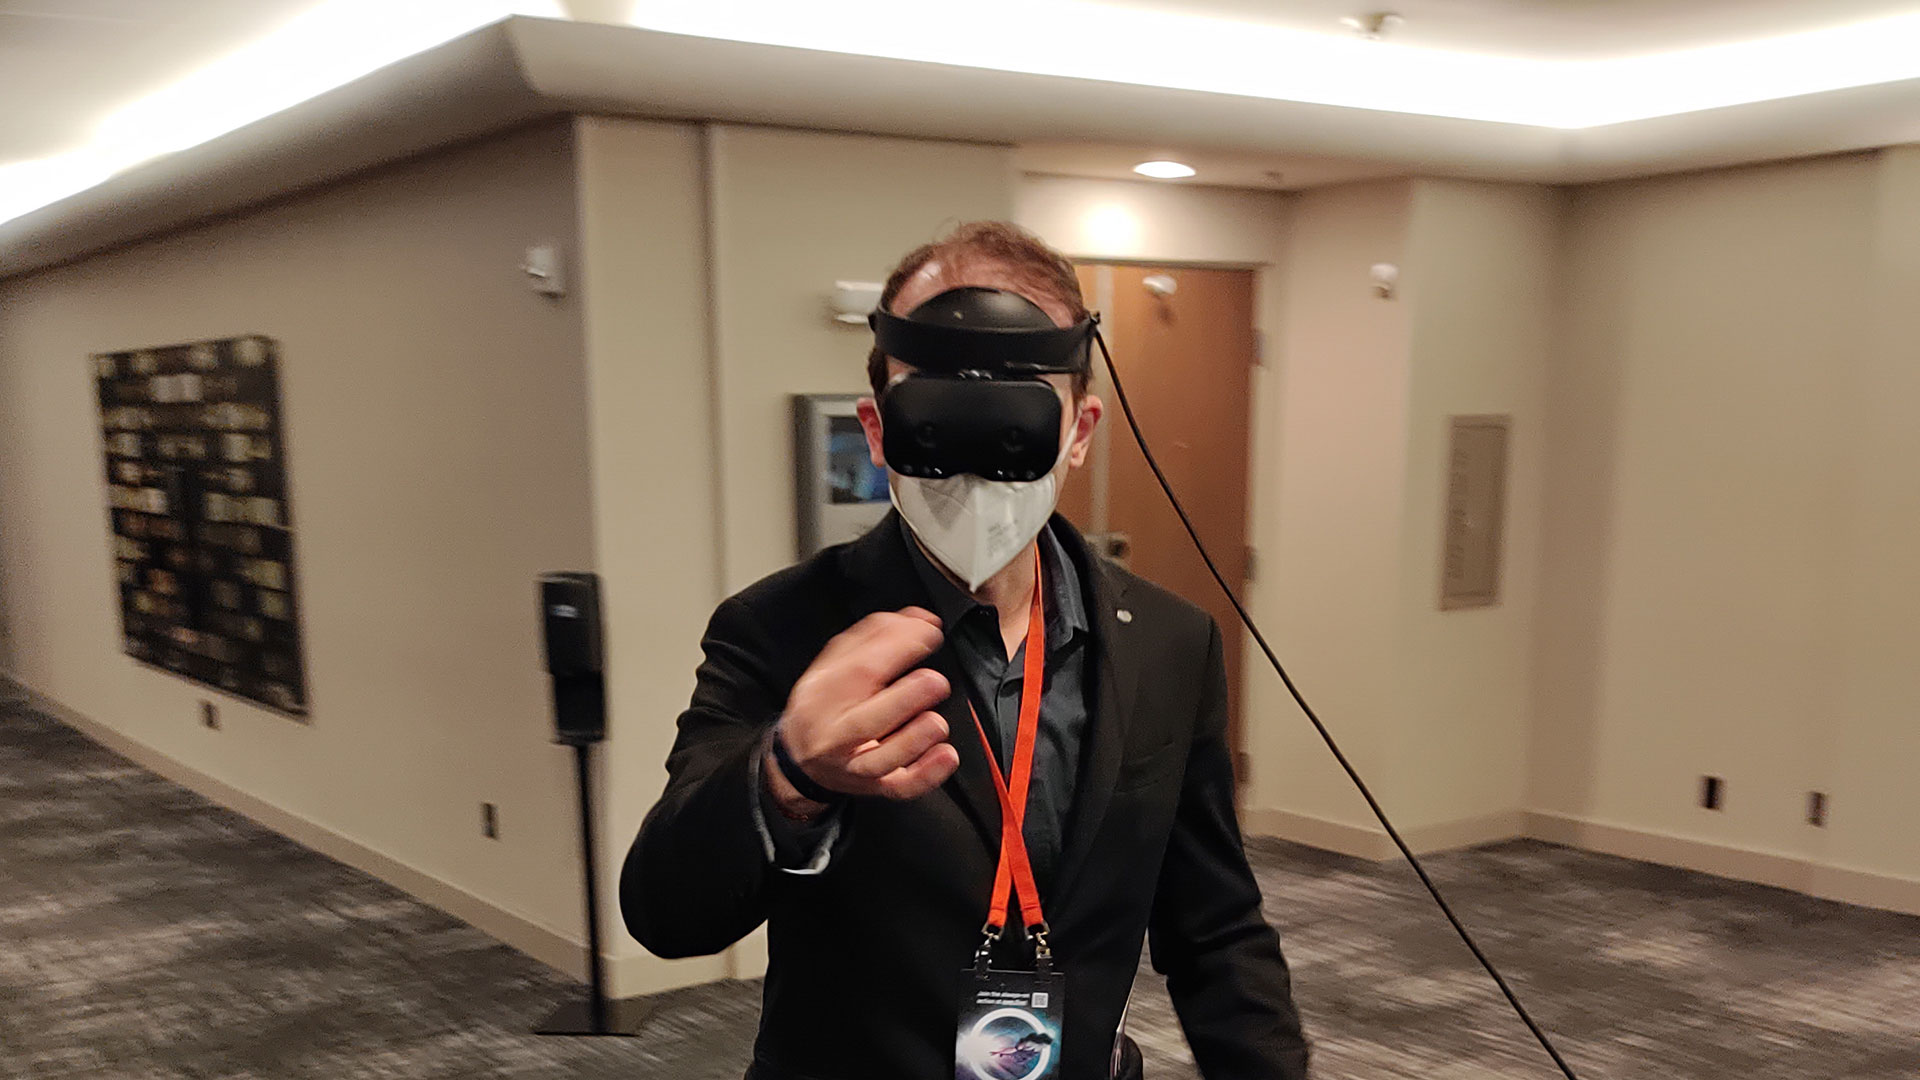 AWE 2021: Hands-on Lynx-R1 mixed reality headset - The Ghost Howls